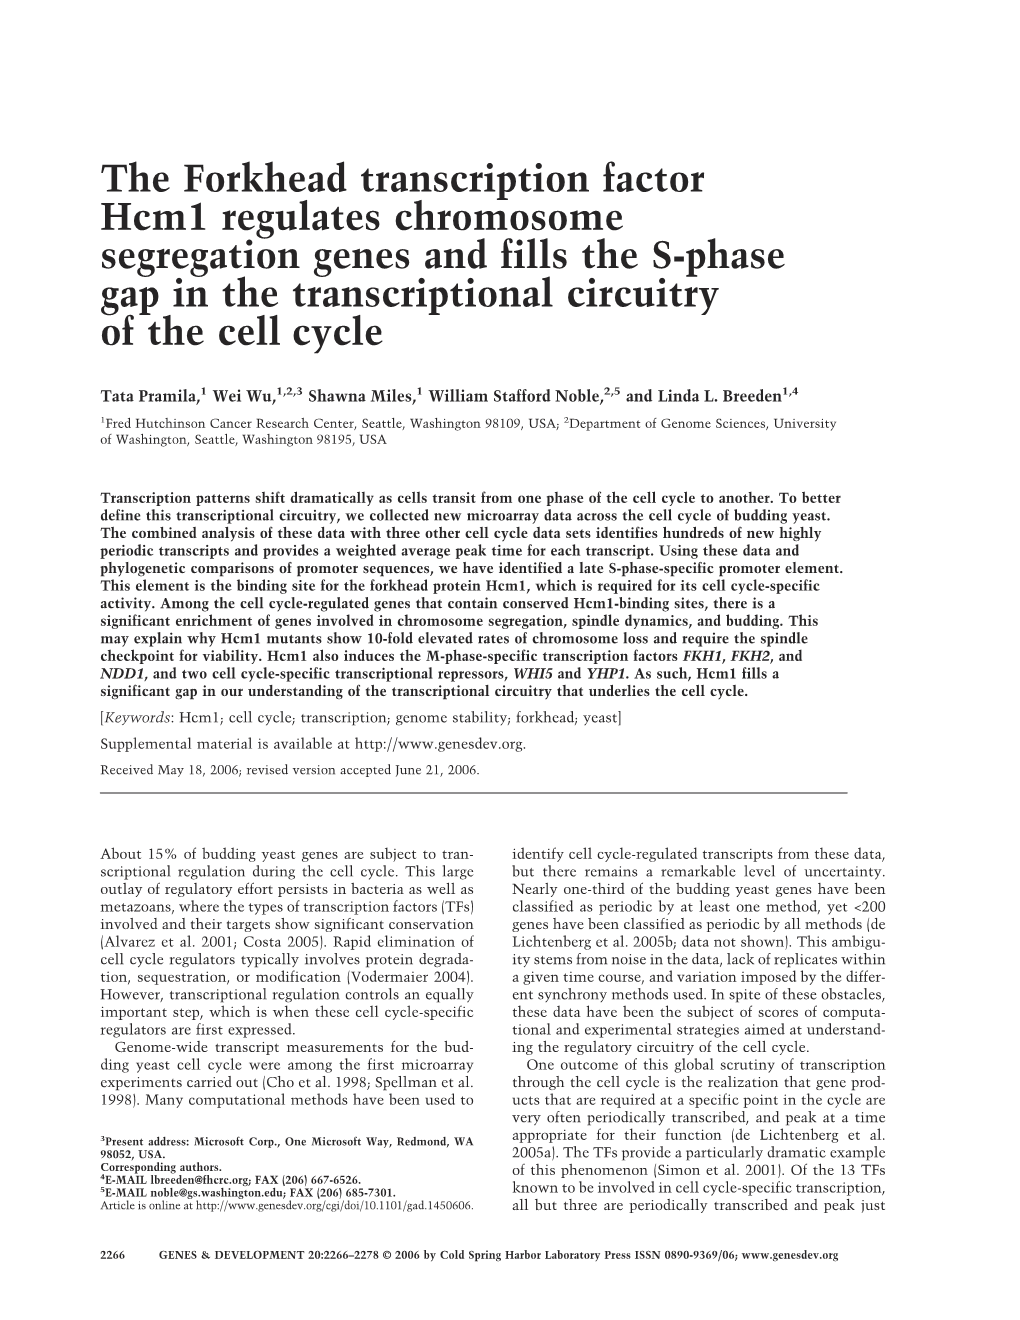 The Forkhead Transcription Factor Hcm1 Regulates Chromosome Segregation Genes and Fills the S-Phase Gap in the Transcriptional Circuitry of the Cell Cycle